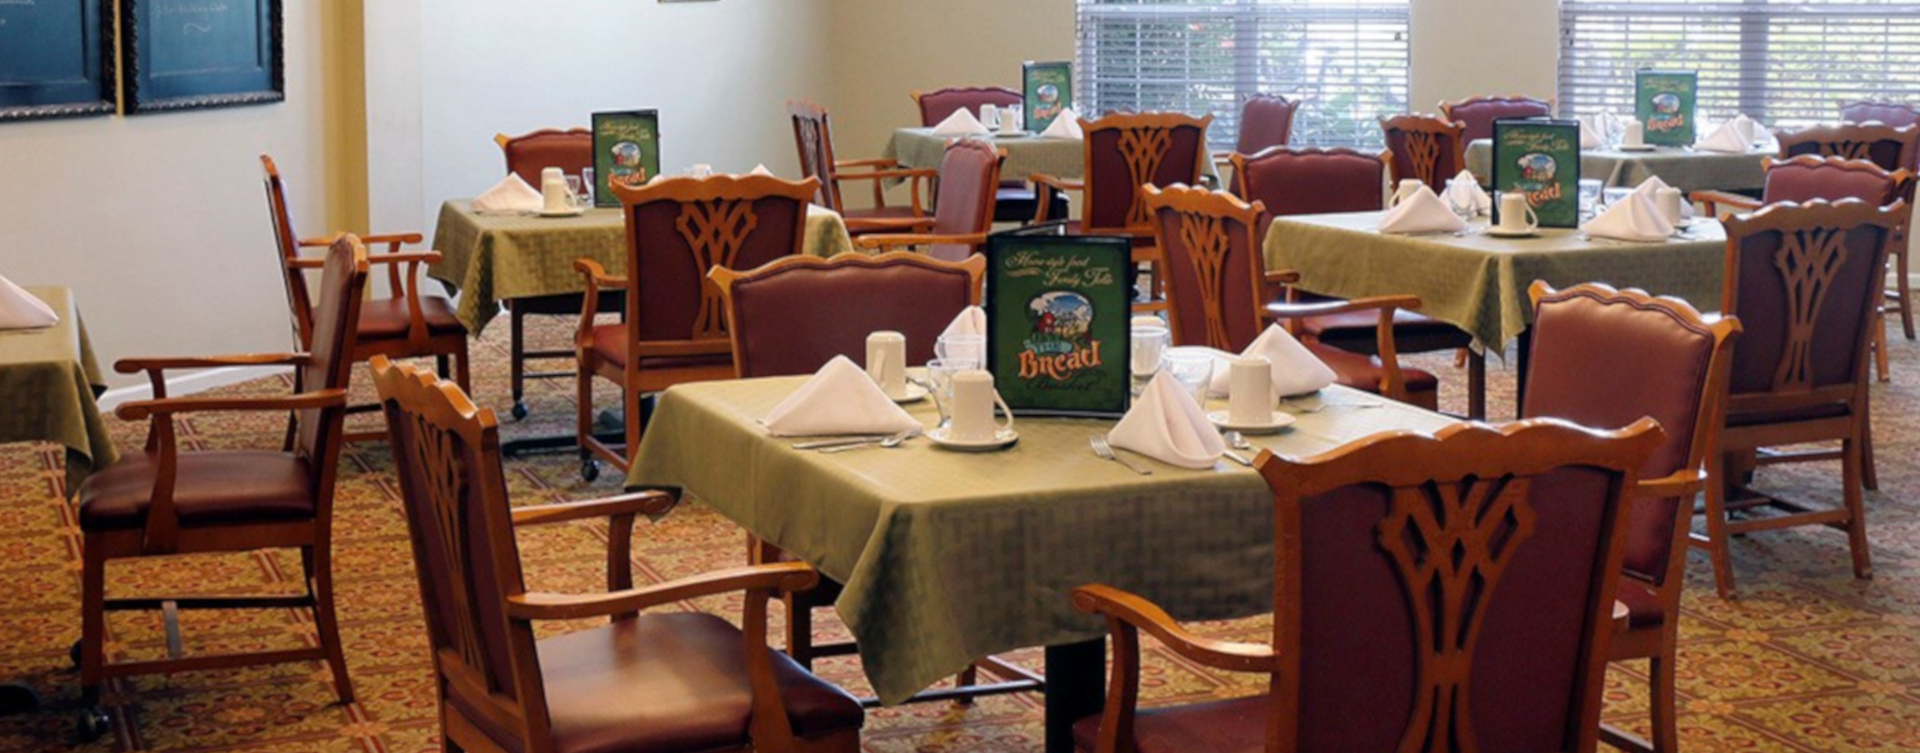 Enjoy restaurant -style meals served three times a day in our dining room at Bickford of West Des Moines